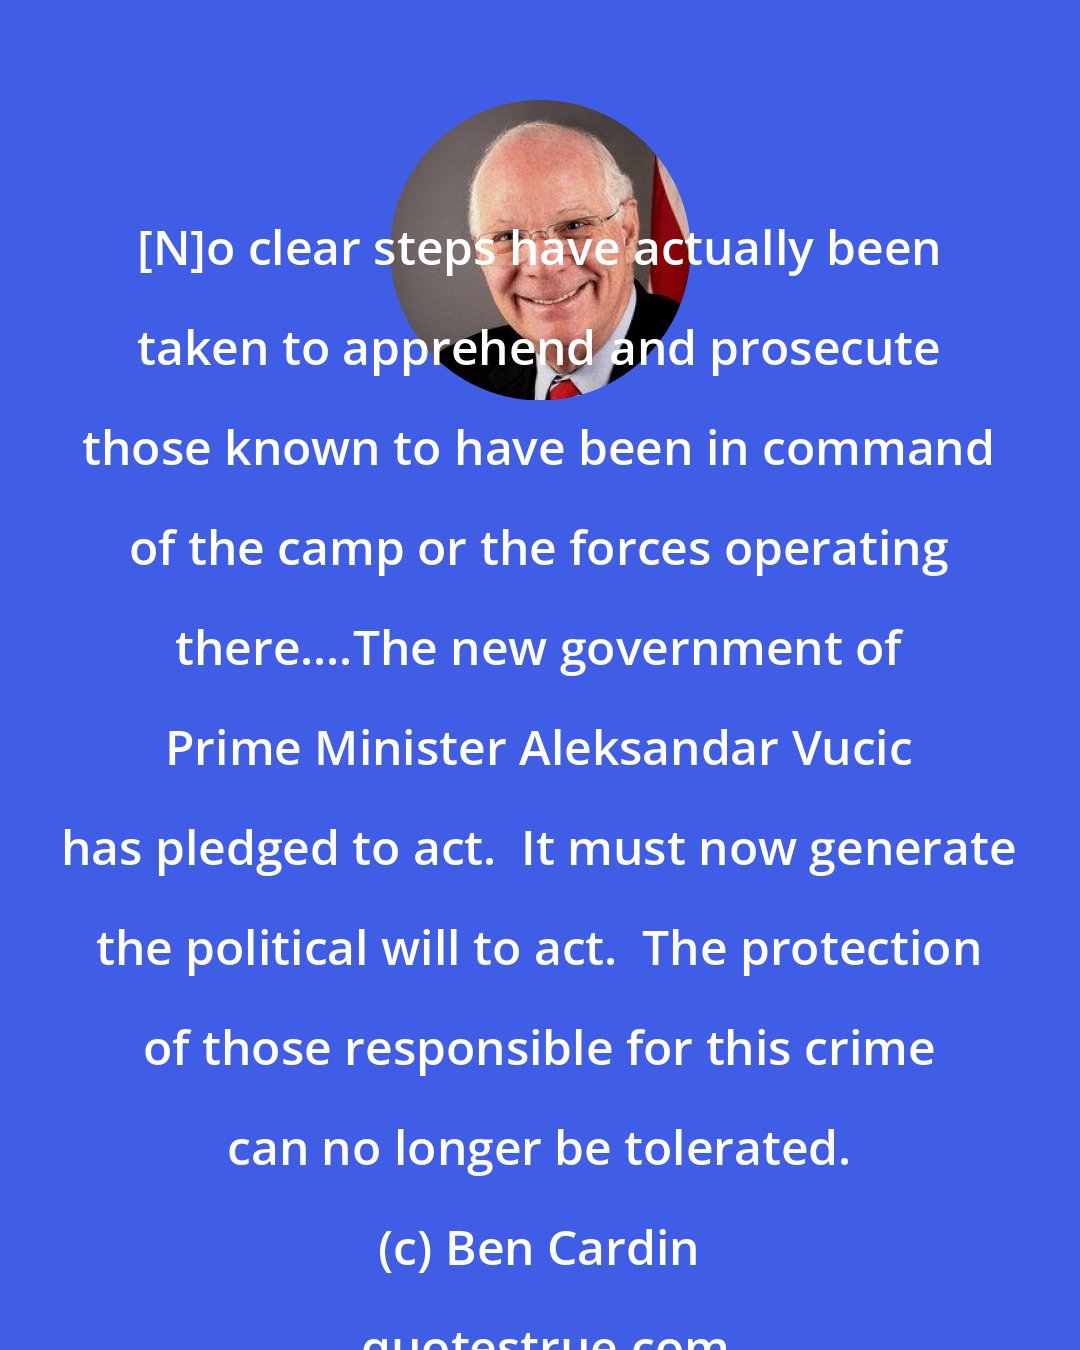 Ben Cardin: [N]o clear steps have actually been taken to apprehend and prosecute those known to have been in command of the camp or the forces operating there....The new government of Prime Minister Aleksandar Vucic has pledged to act.  It must now generate the political will to act.  The protection of those responsible for this crime can no longer be tolerated.